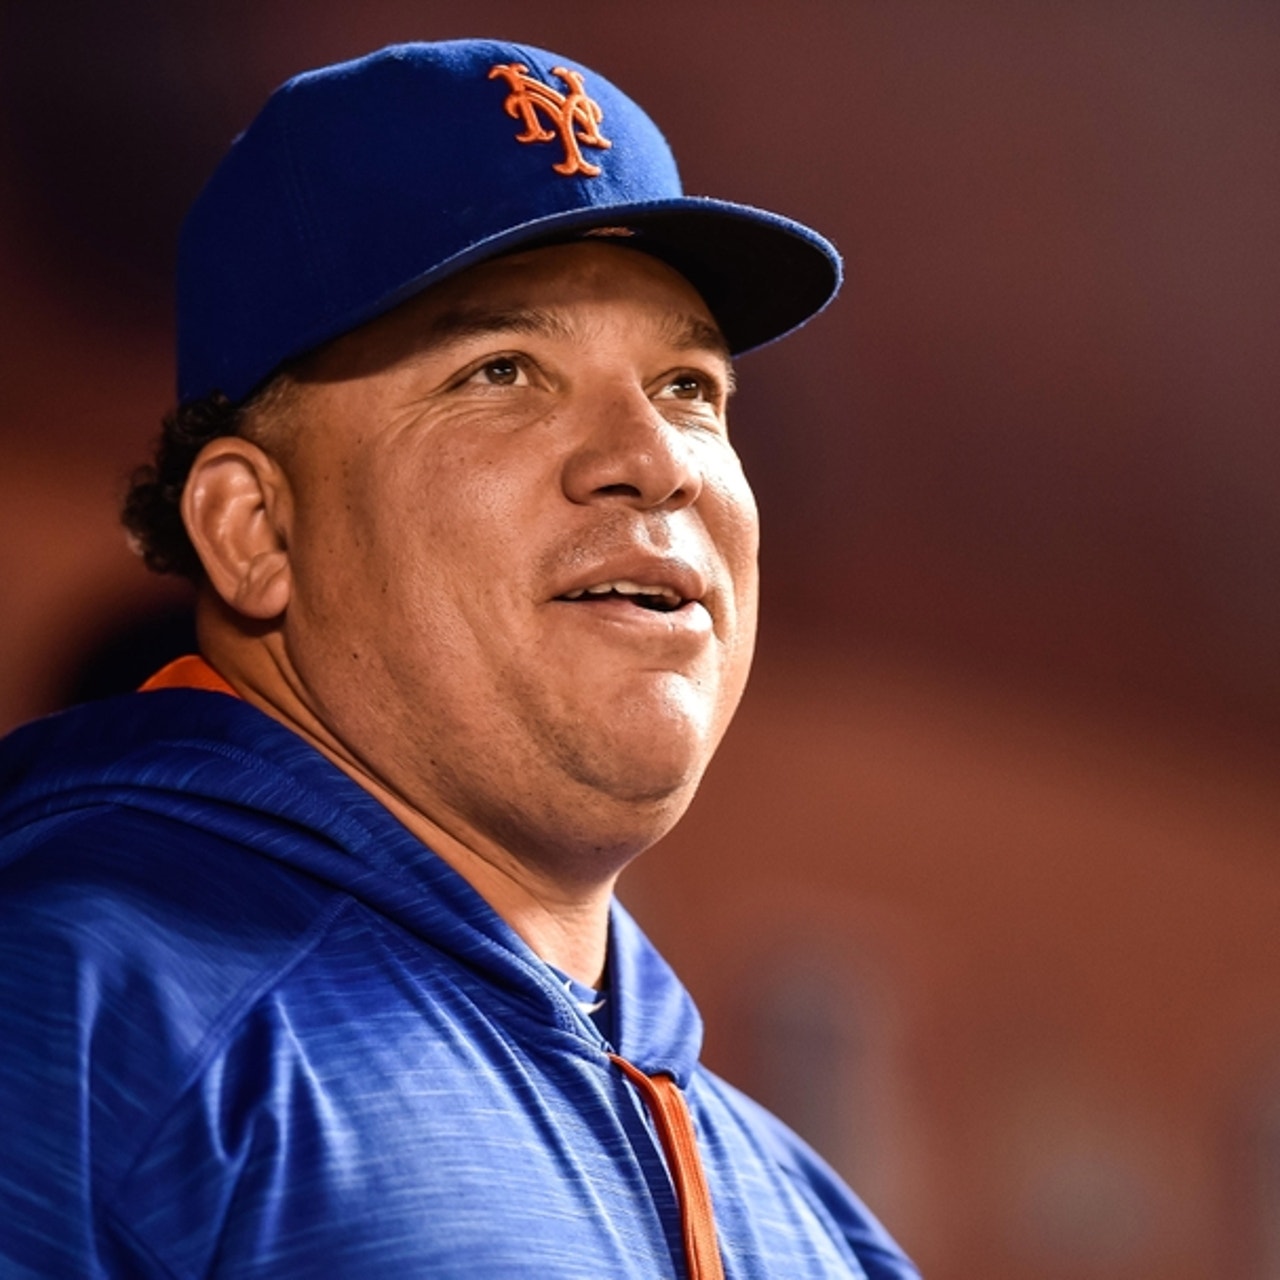 Yankees should give Bartolo Colon some time off to regroup and